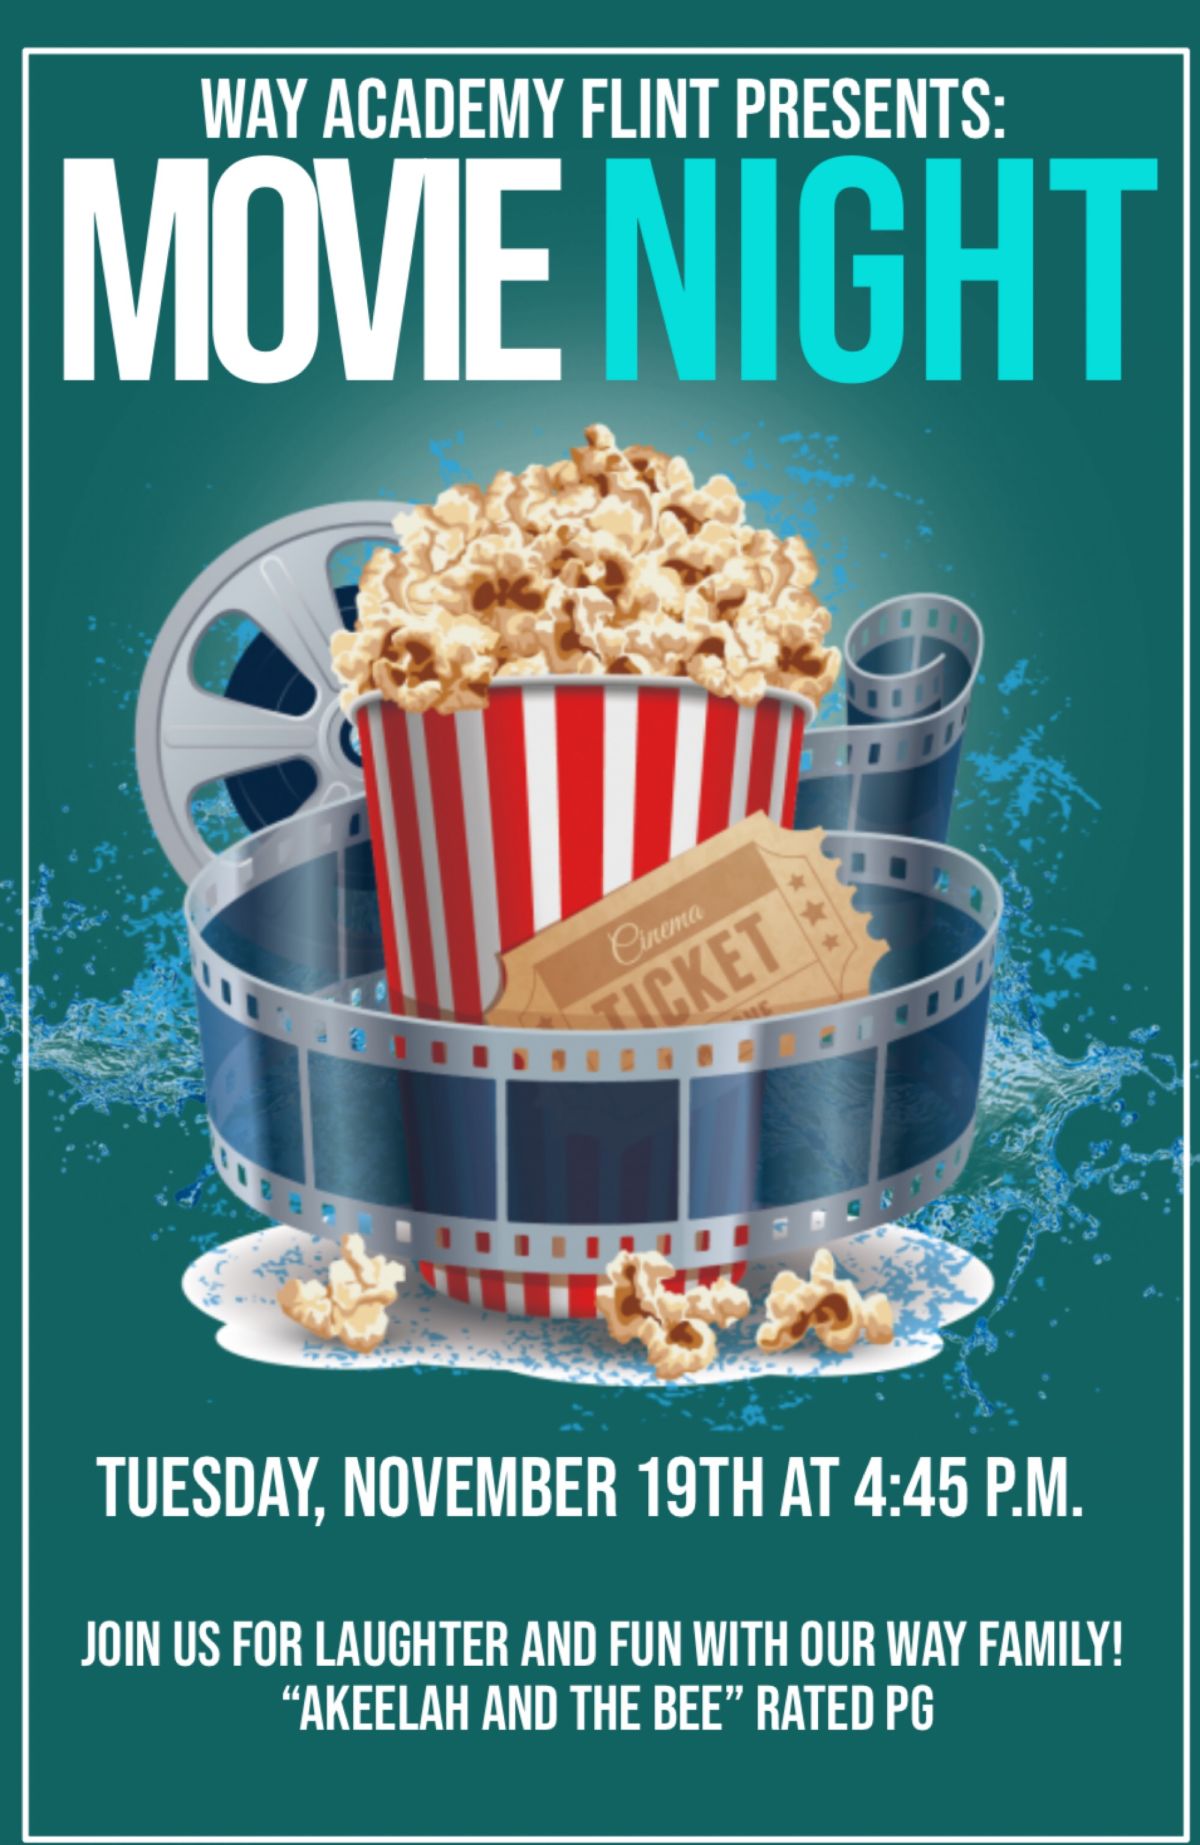 Come to our Movie Night on Nov 19th! | News Details